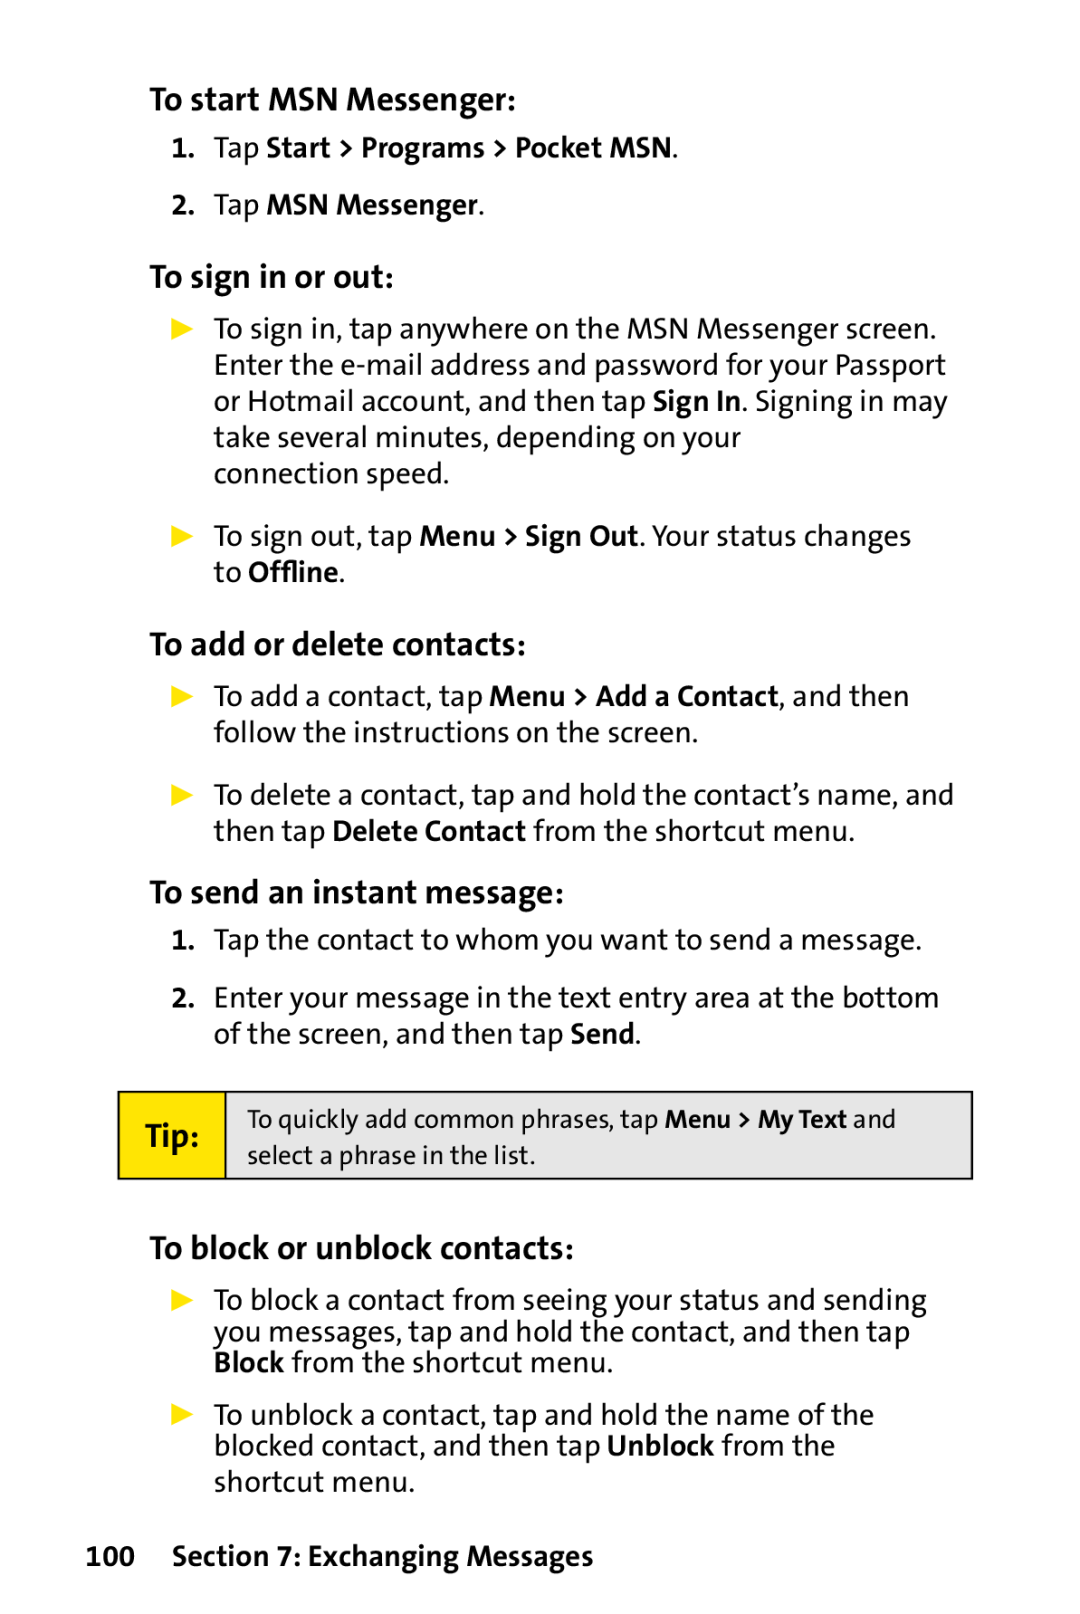 Sprint Nextel PPC-6700 To start MSN Messenger, To sign in or out, To add or delete contacts, To send an instant message 